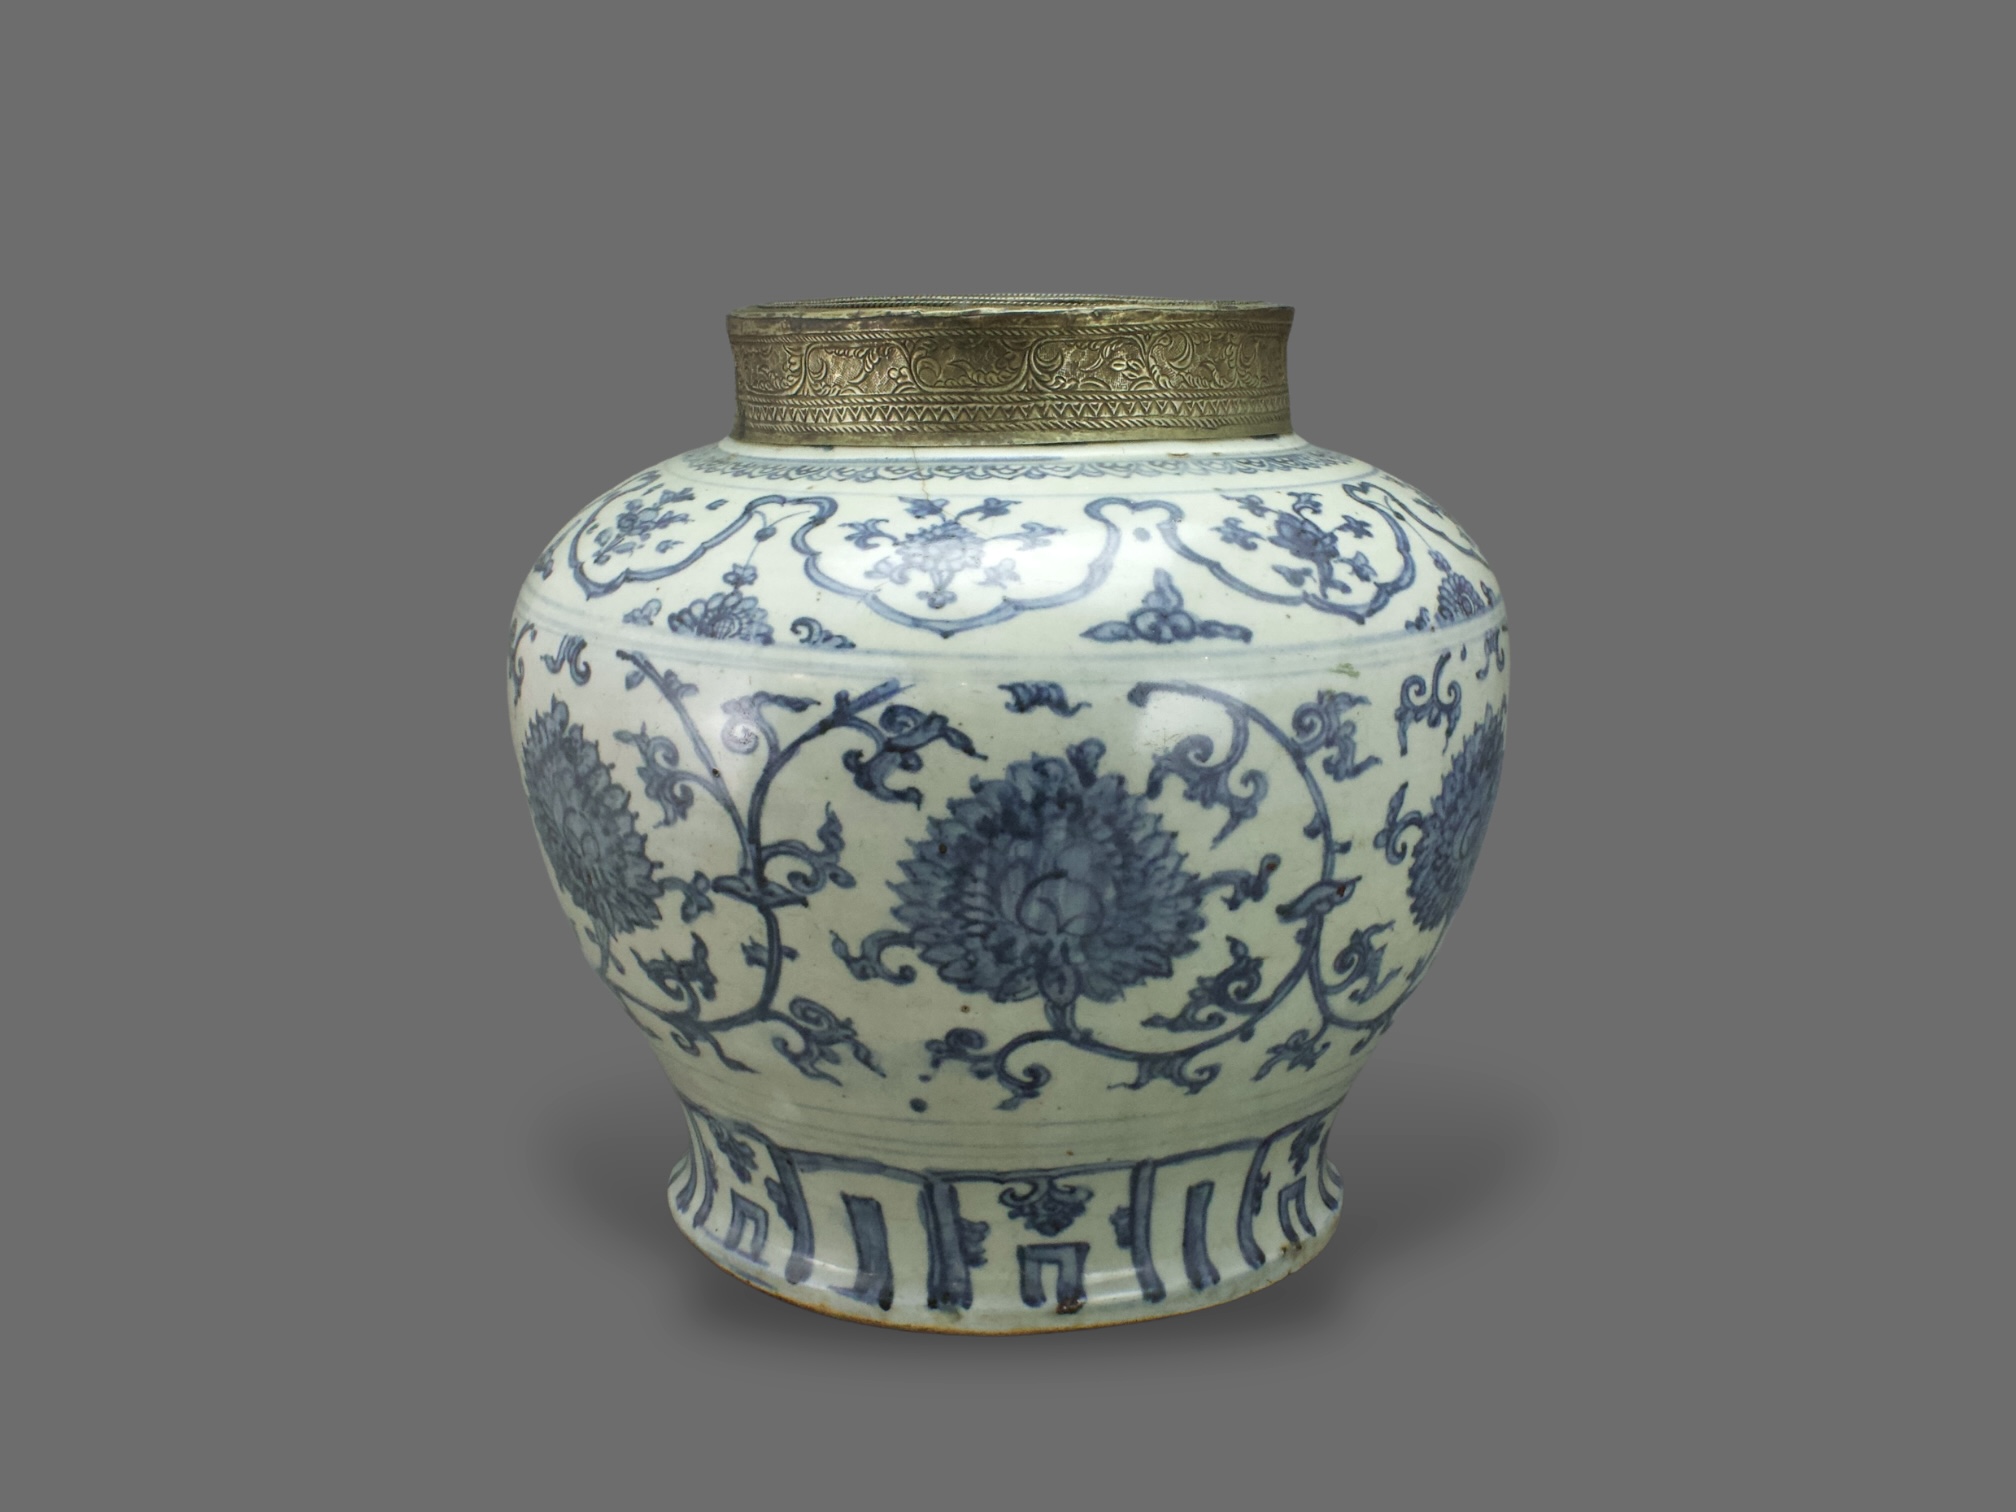 A Large Blue and White Lotus Jar, guan, mid Ming dynasty H:29.4cm the heavily potted jar of - Image 4 of 6